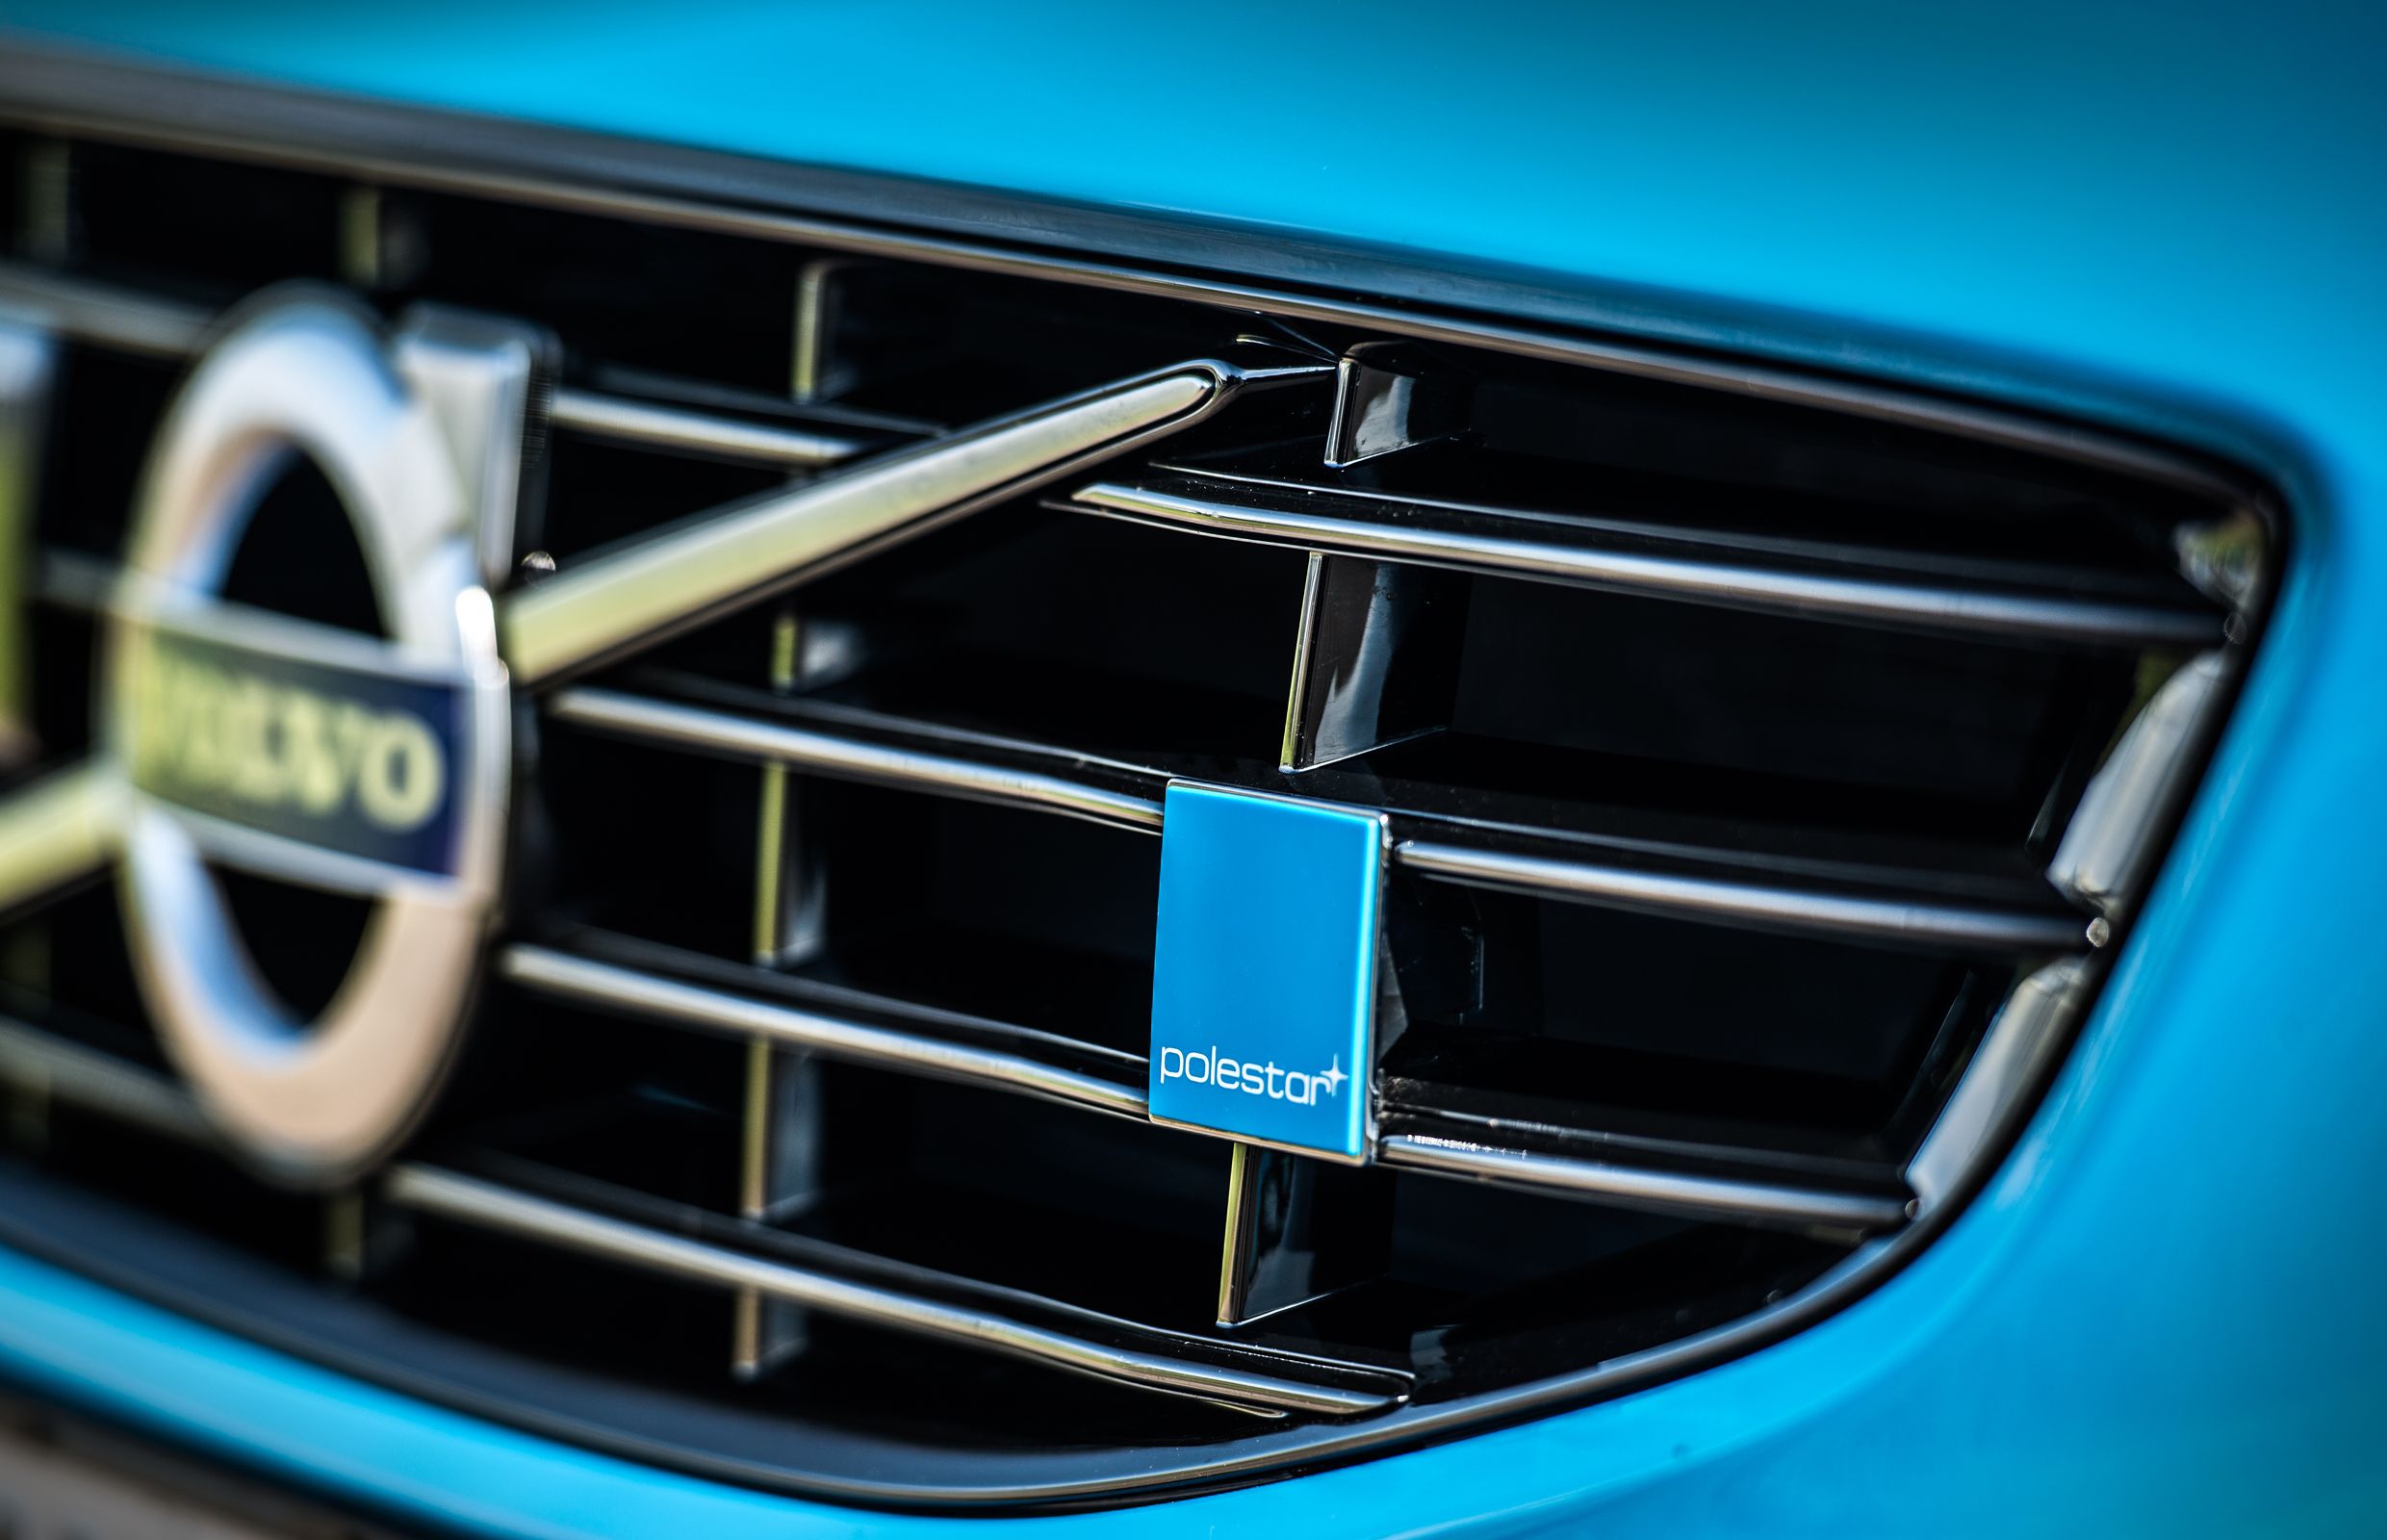 Volvo's Polestar now a standalone brand focusing on electric cars